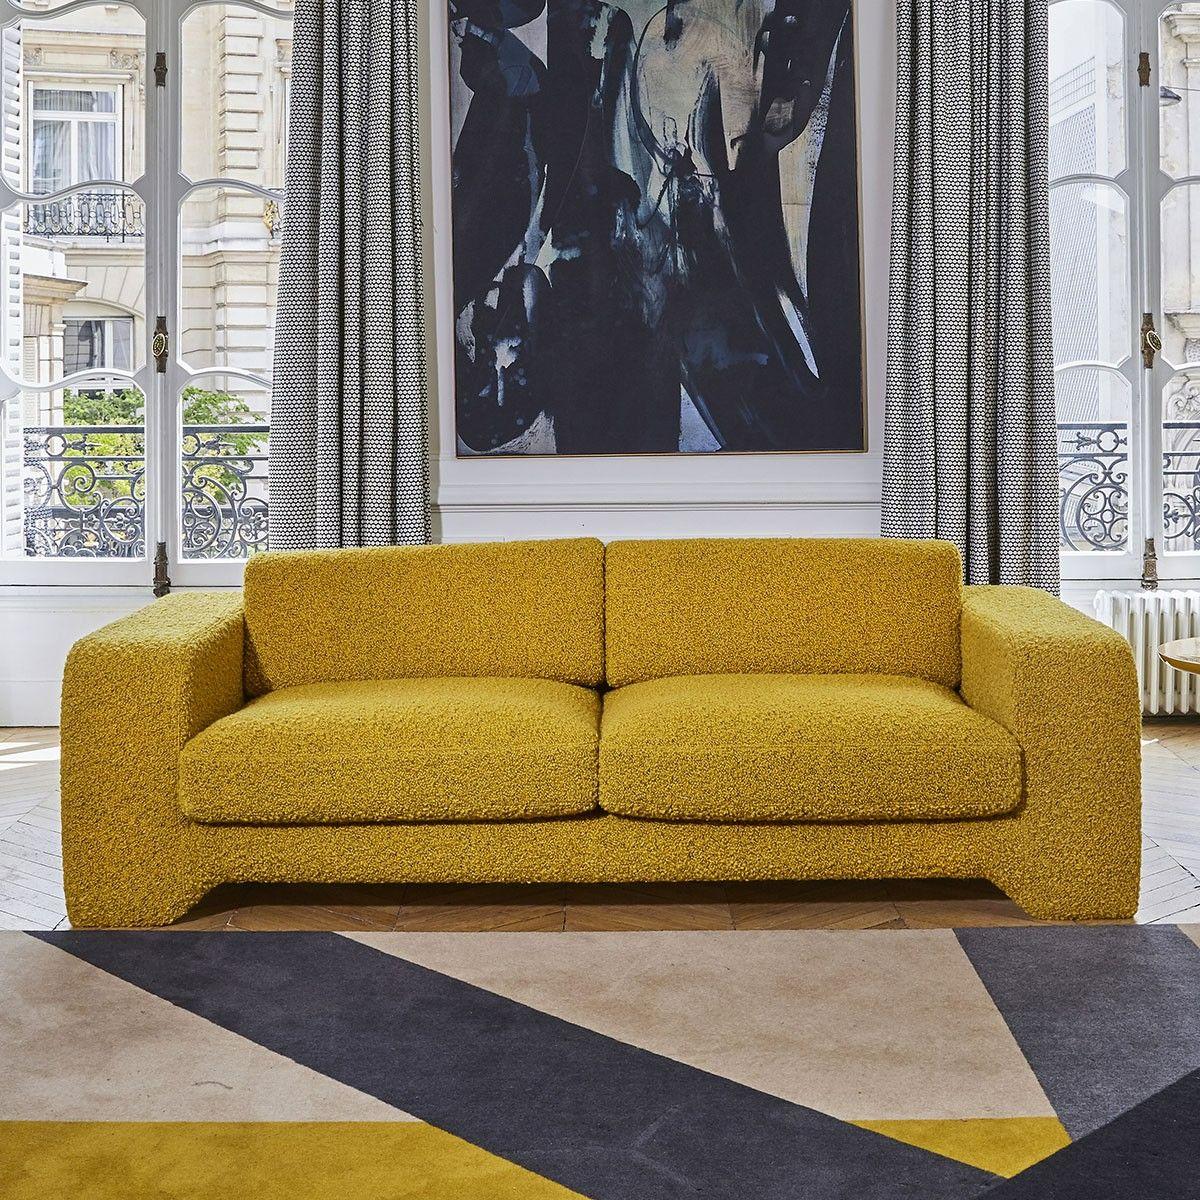 Popus Editions Giovanna 4 seater sofa in Orange Verone Velvet Upholstery

Giovanna is a sofa with a strong profile. A sober, plush line, with this famous detail that changes everything, so as not to forget its strength of character and this